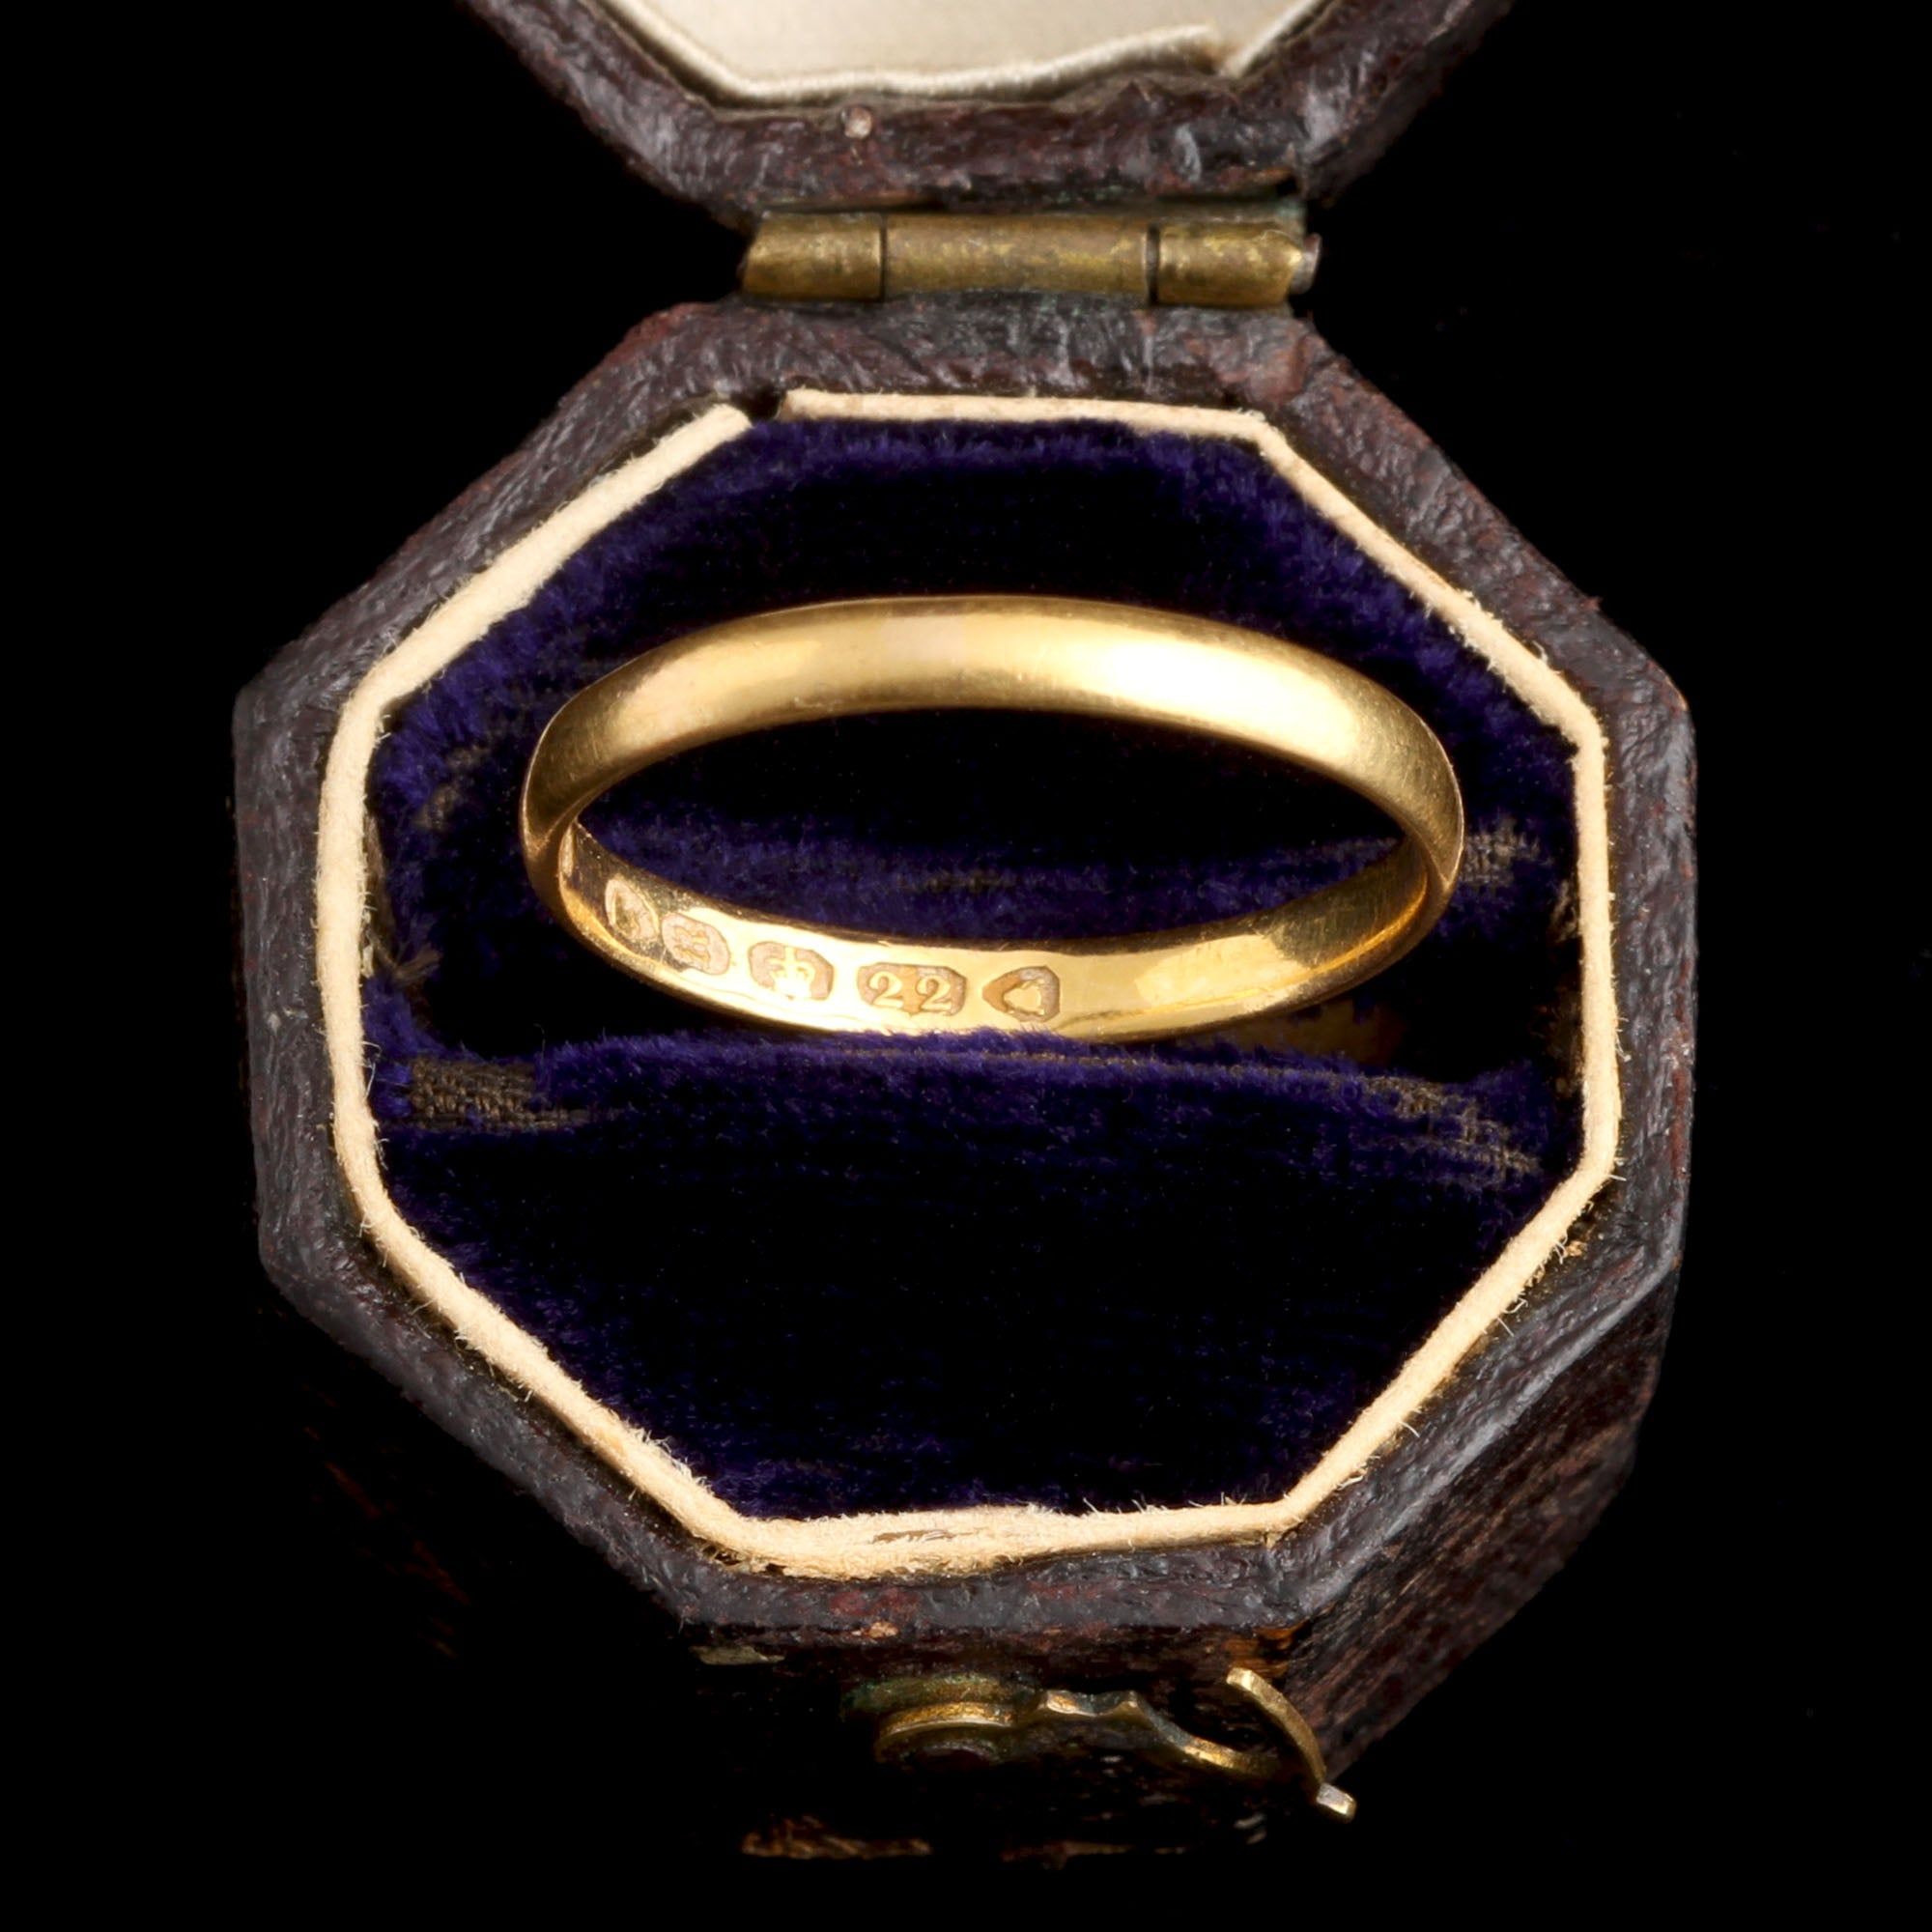 Early Victorian 22k Gold Wedding Band